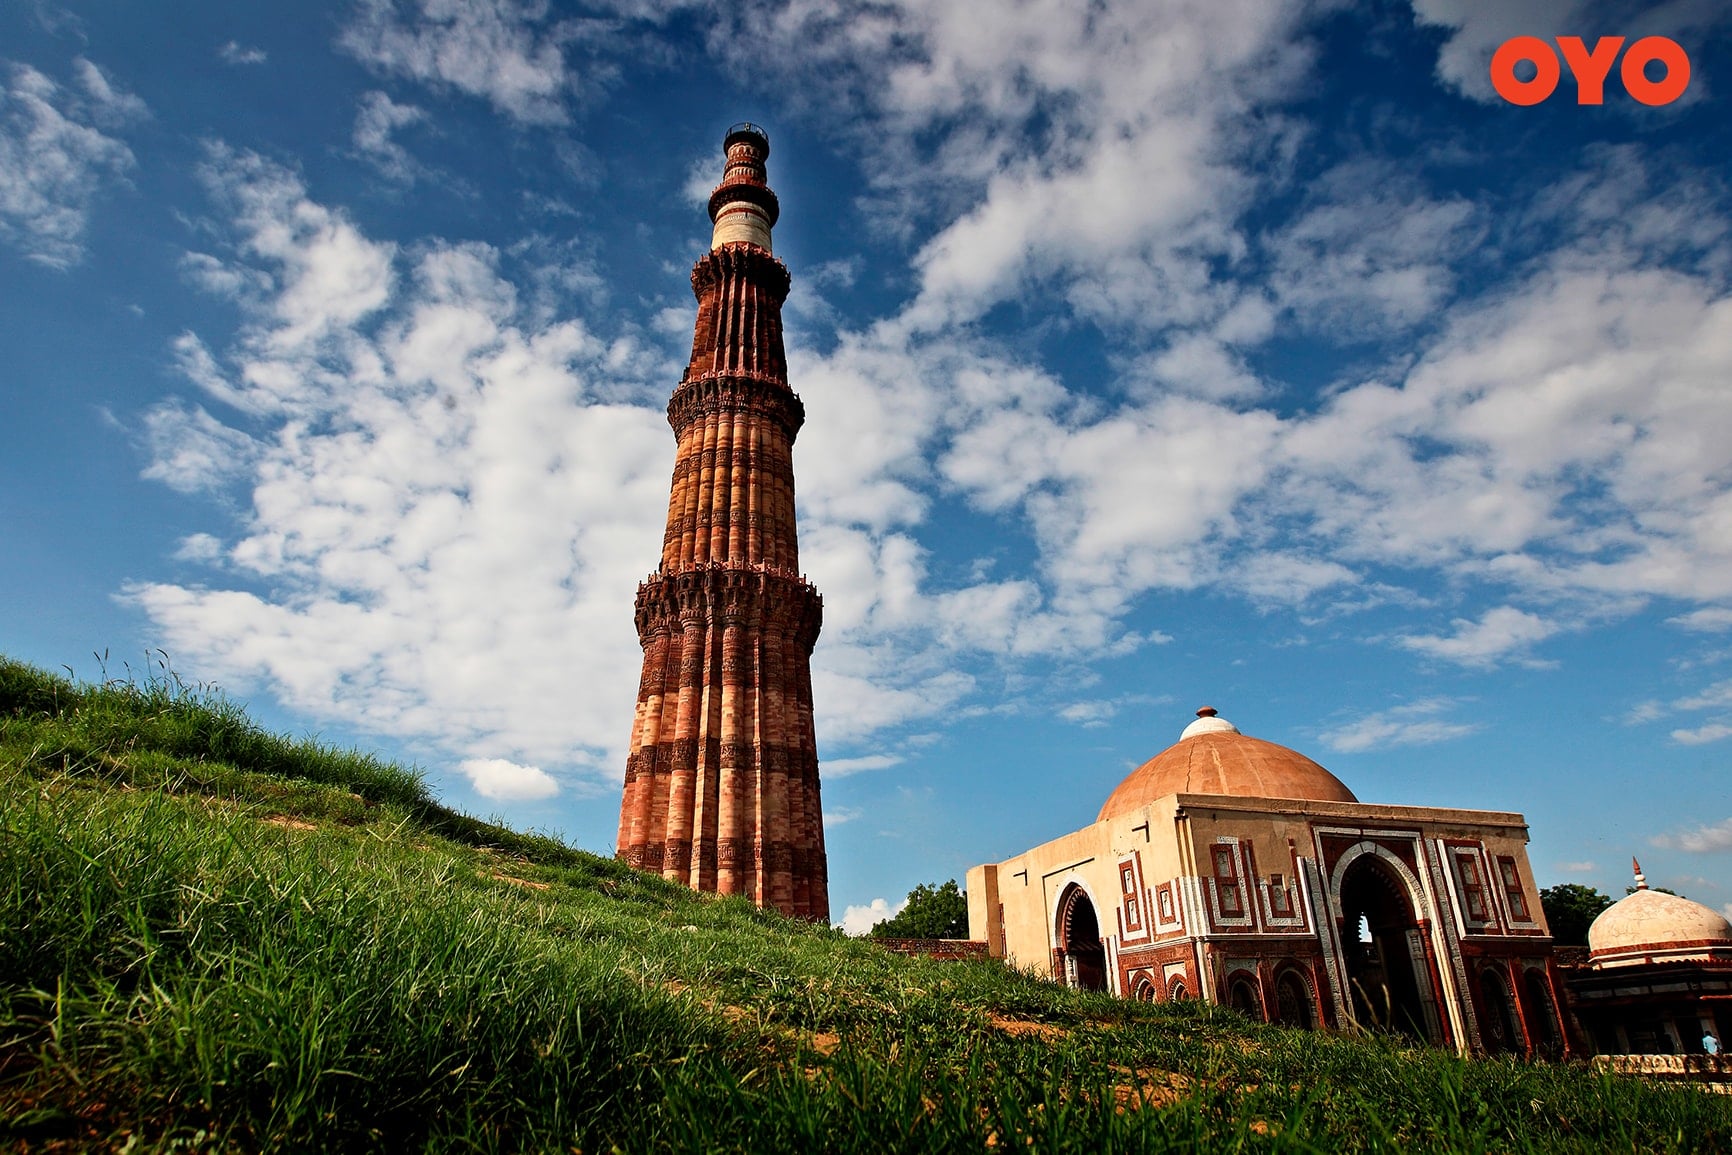 Qutub Minar, Delhi - one of the most famous historical places in India